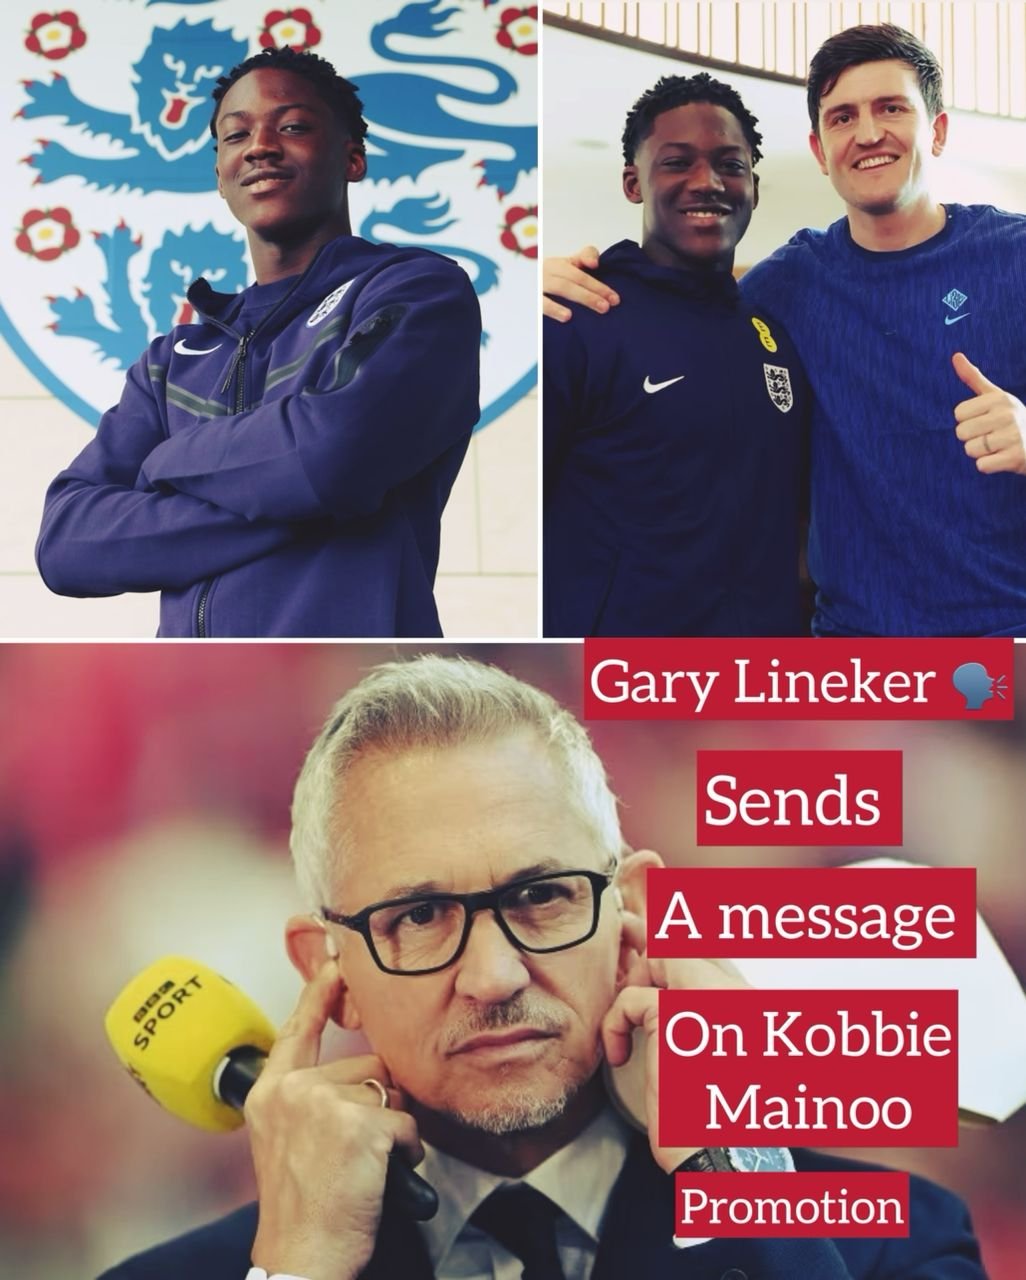 England 63-year-old legend Gary Lineker reacts to Manchester United midfielder Kobbie Mainoo promotion in the England senior squad with an uplifting message